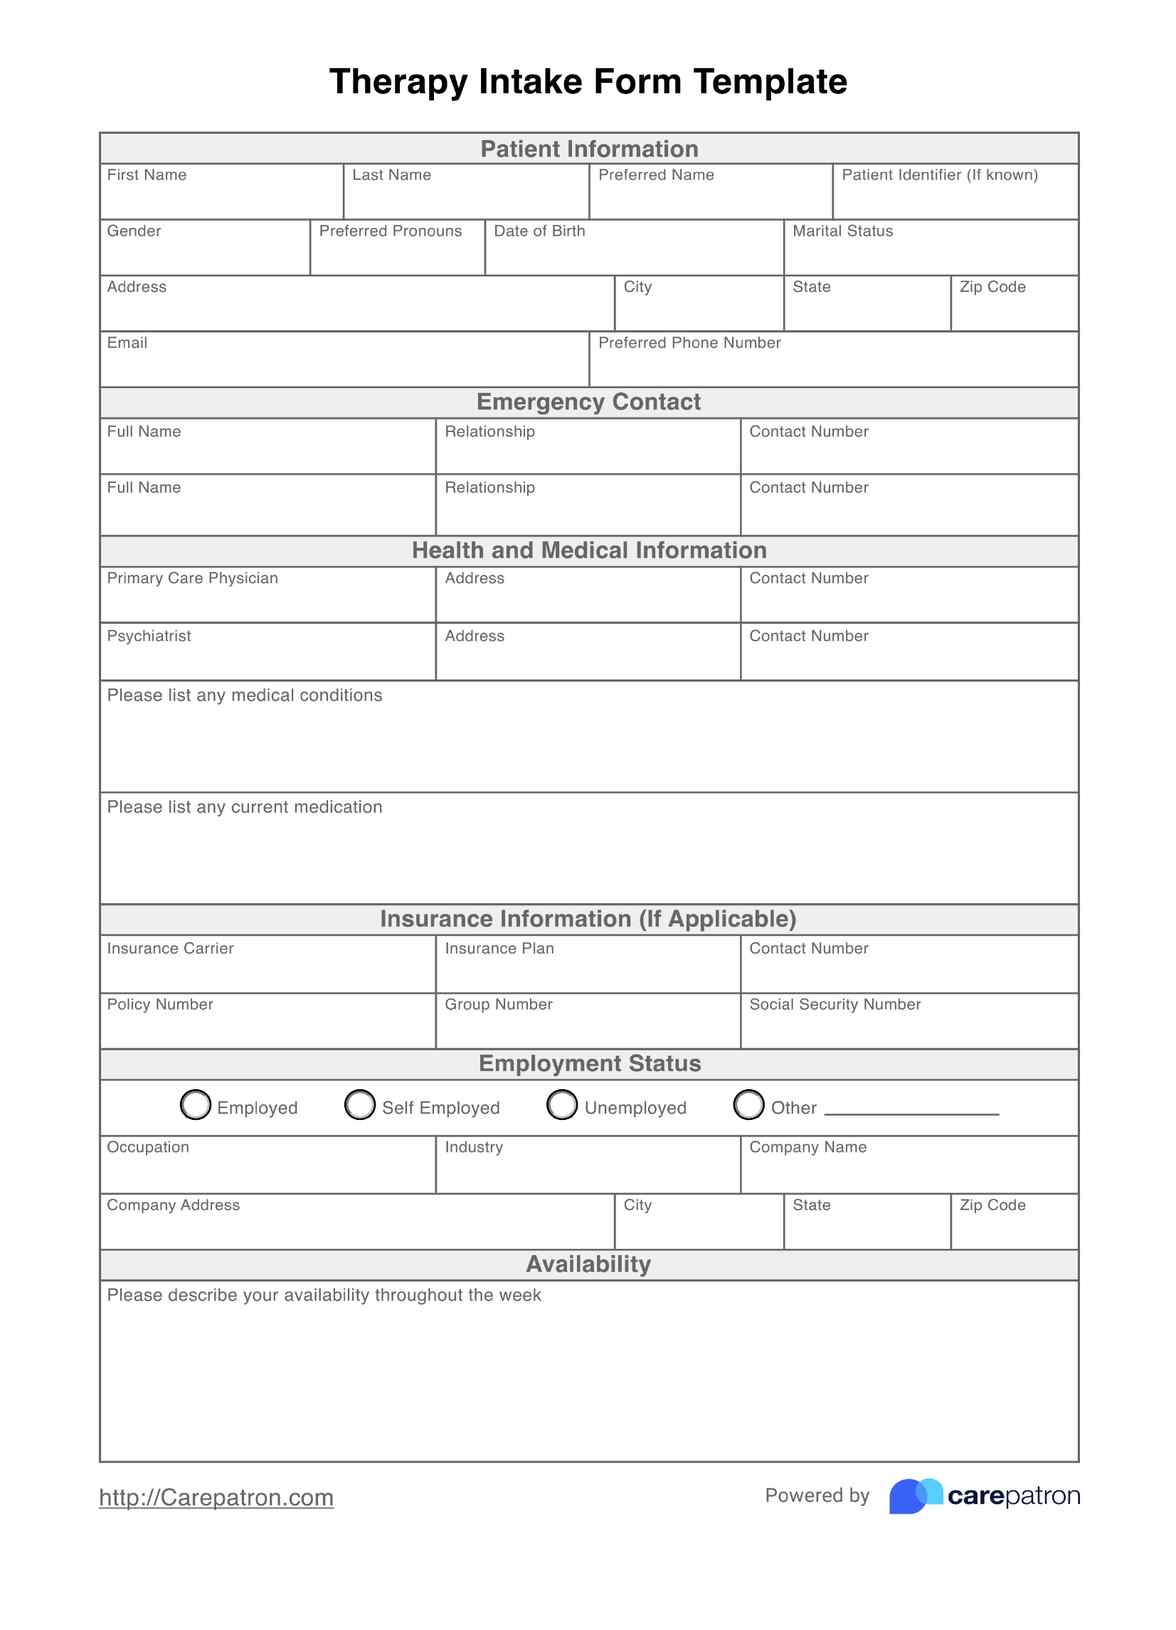 Therapy Intake Form PDF Example